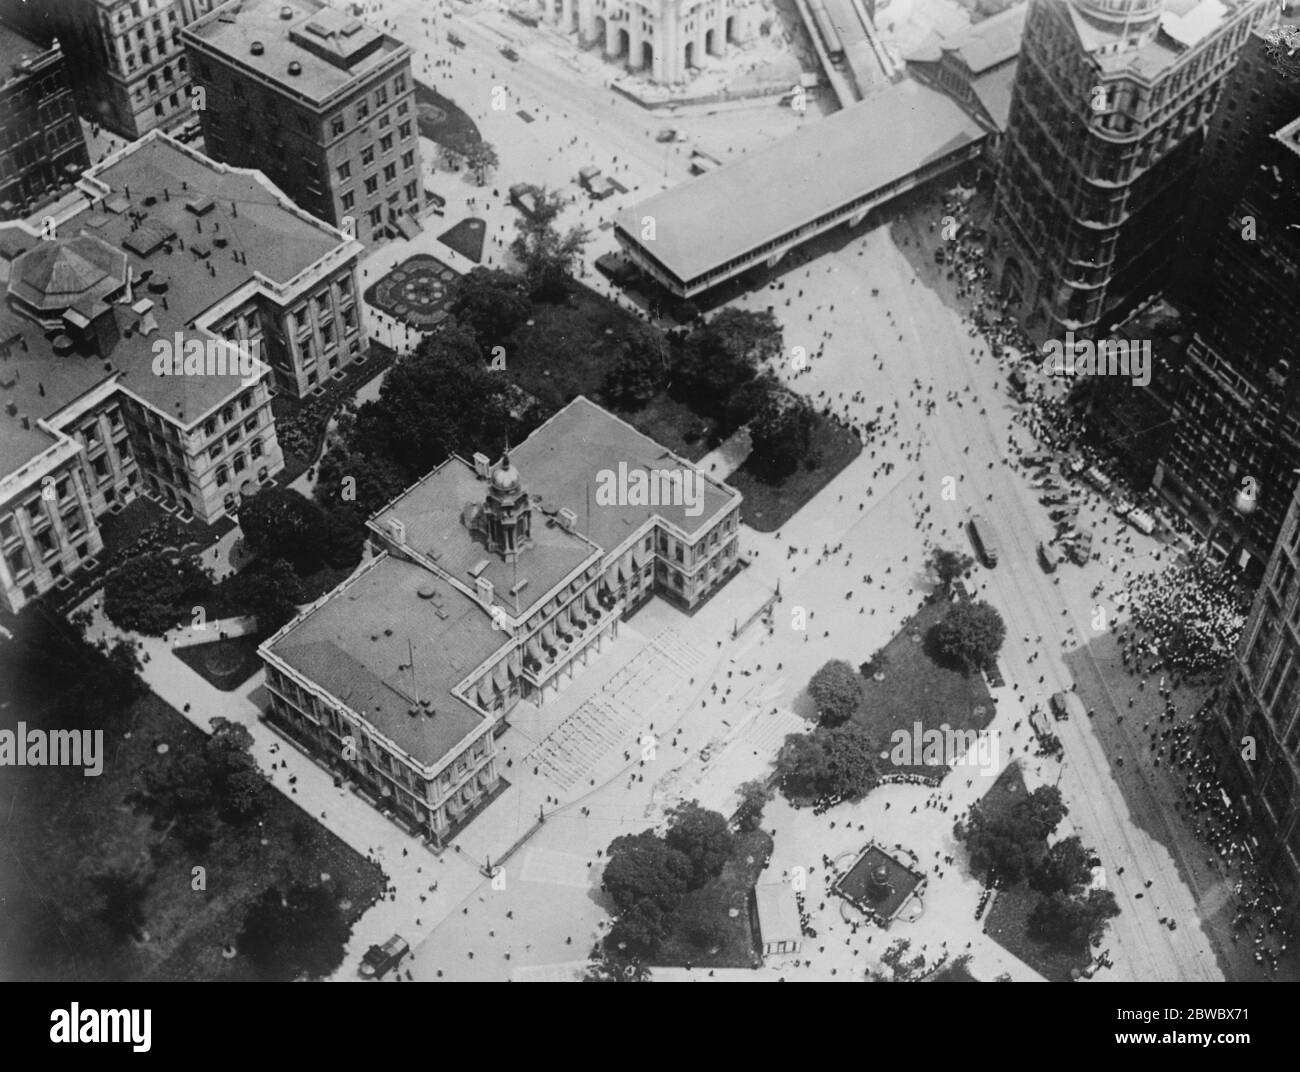 Plot to blow up the heart of New York . It is reported that a bomb was found on a window ledge of the County Court house , but was fortunately discovered before it exploded . An aerial view of the City Hall and Court House . 27 October 1926 Stock Photo